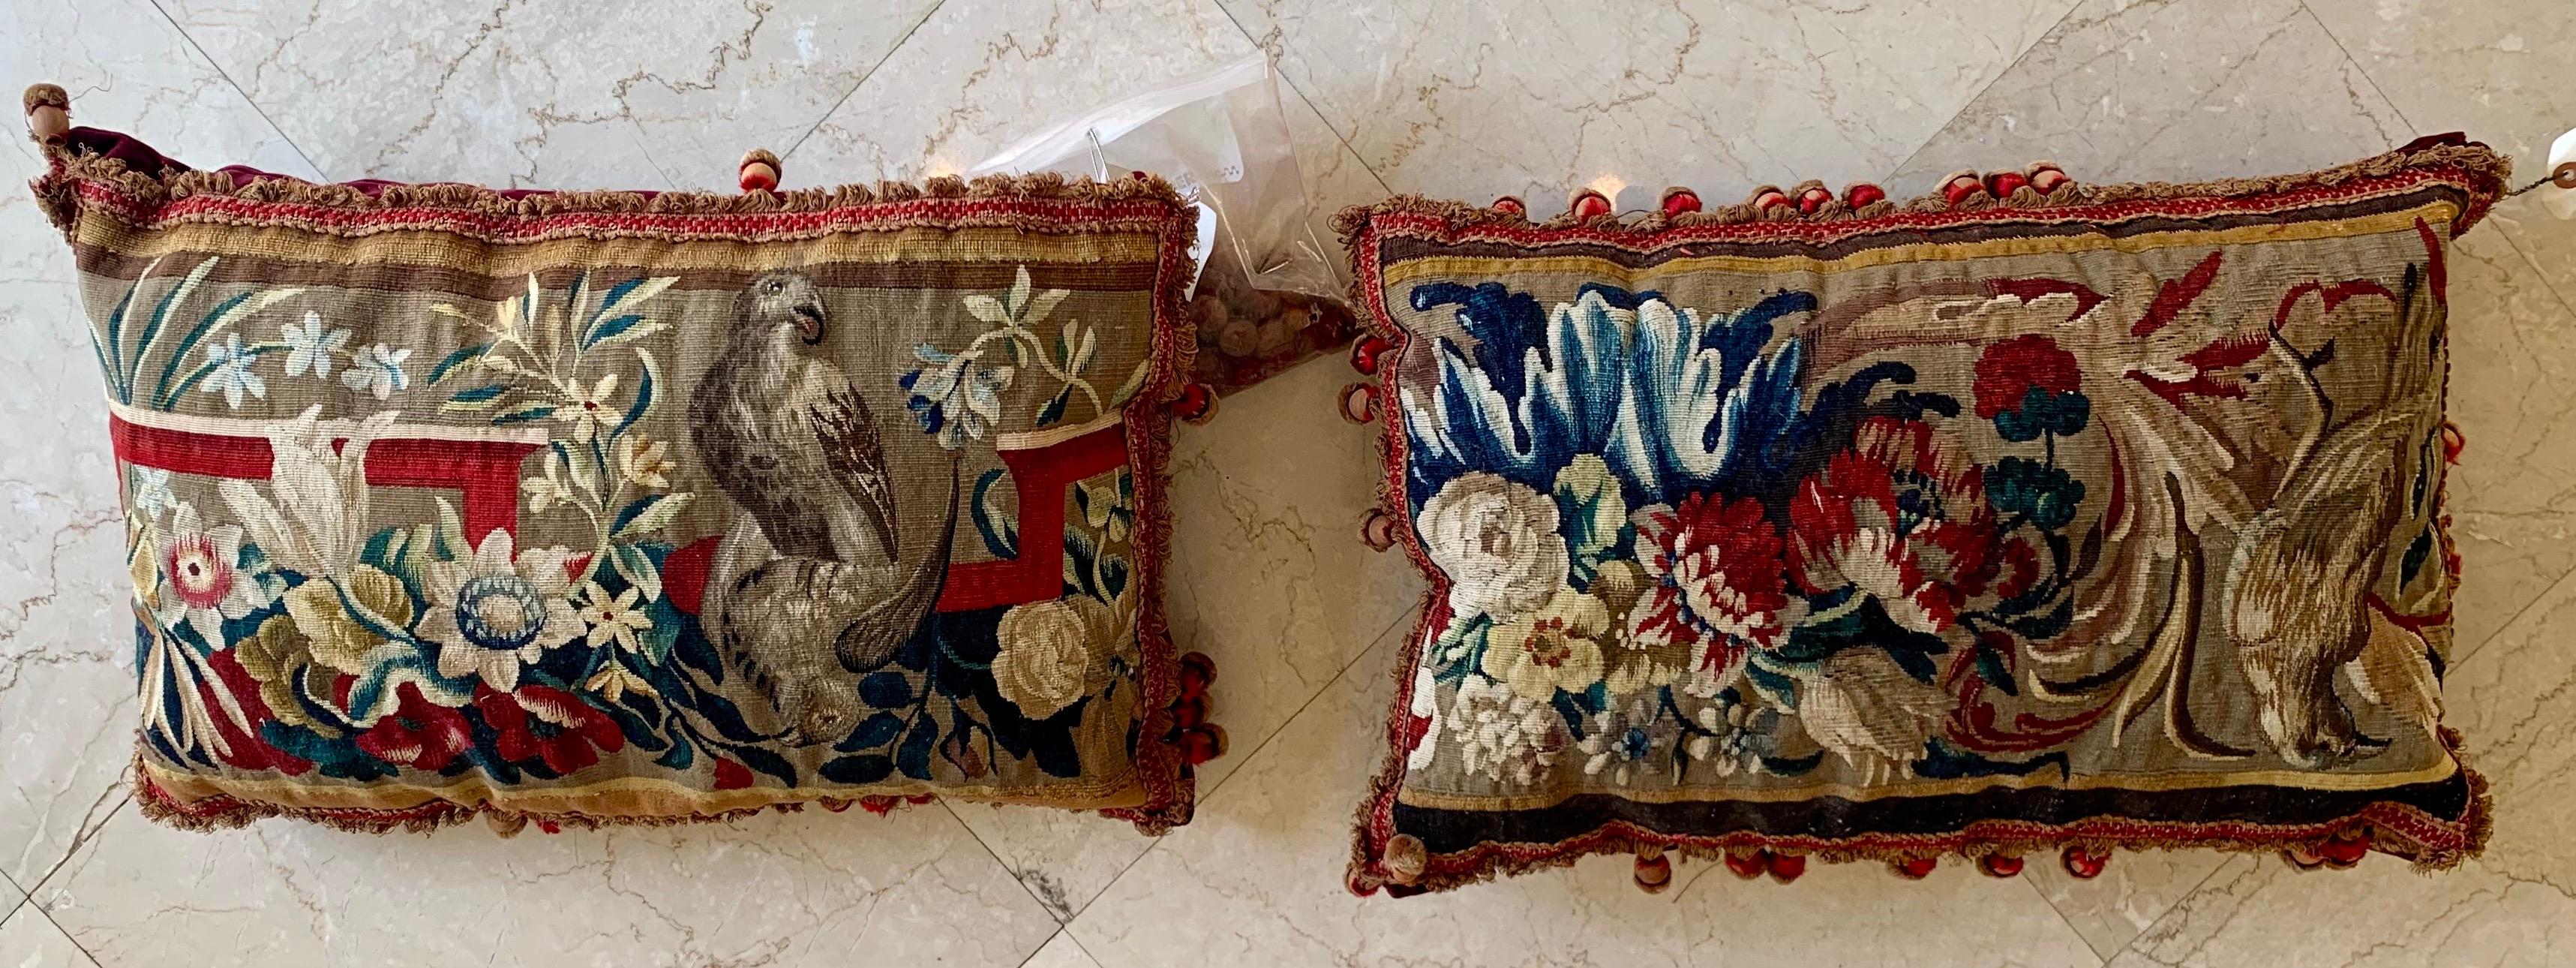 Hand-Woven Pair of Shahkar Antique Pillows with Foliage and Petite Tassels